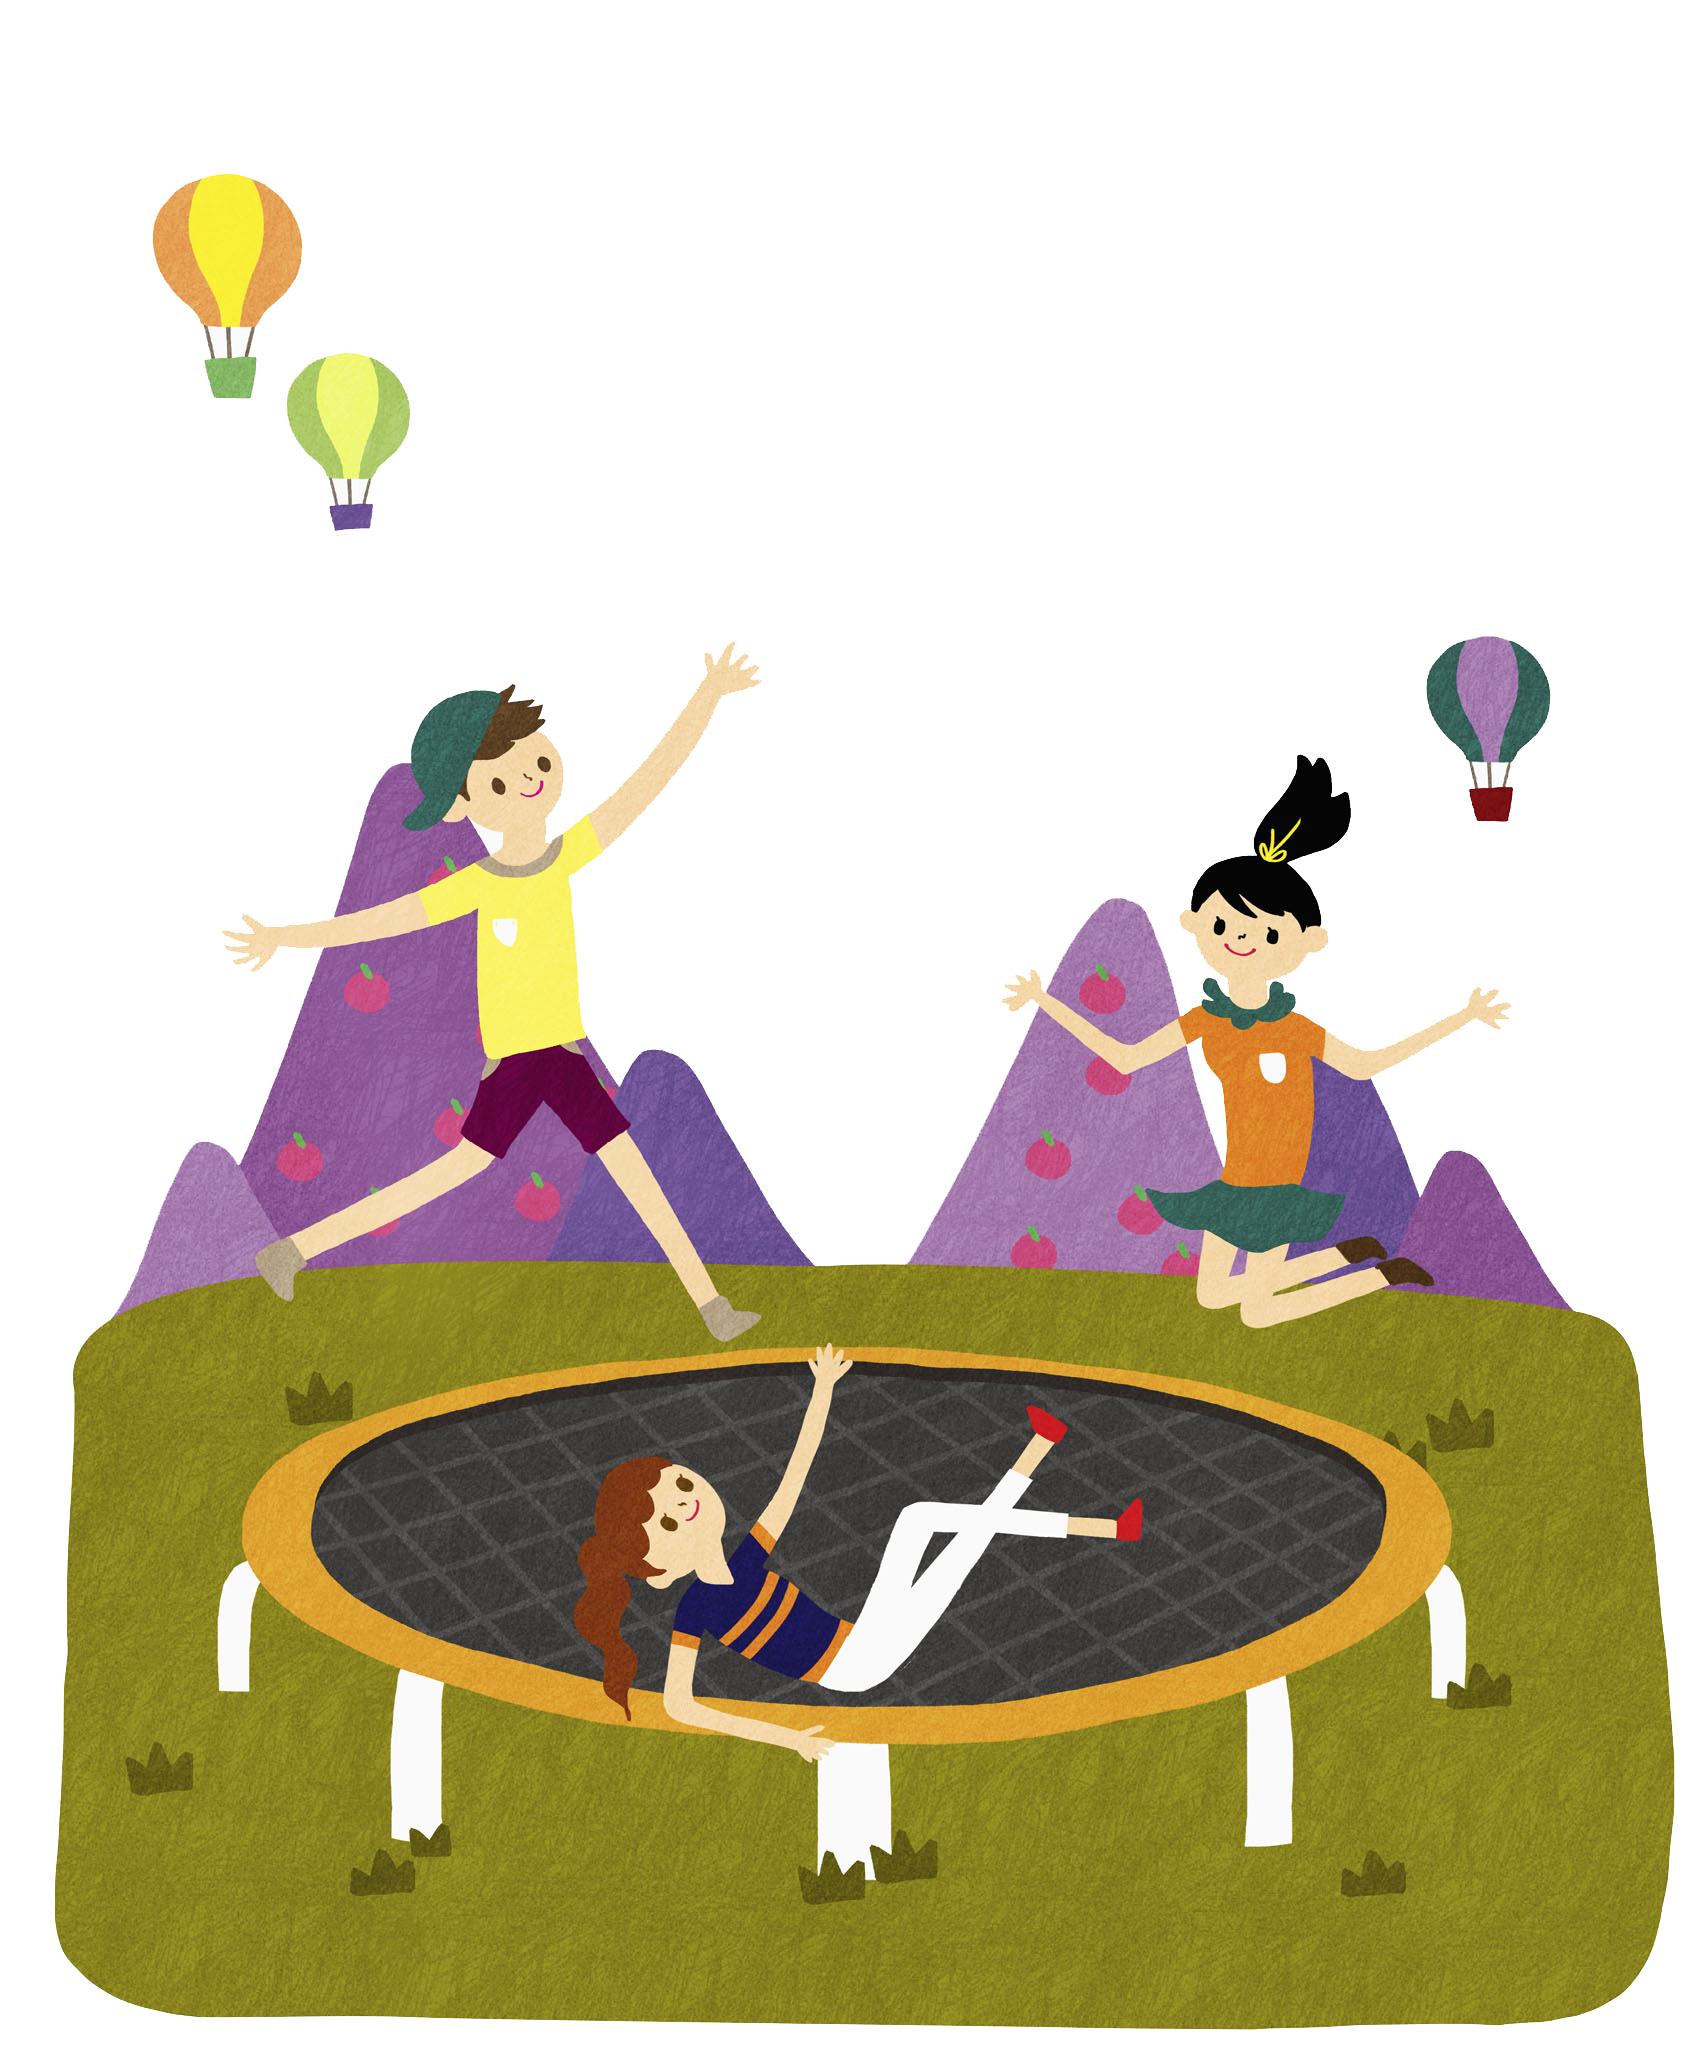 jumping clipart trampoline